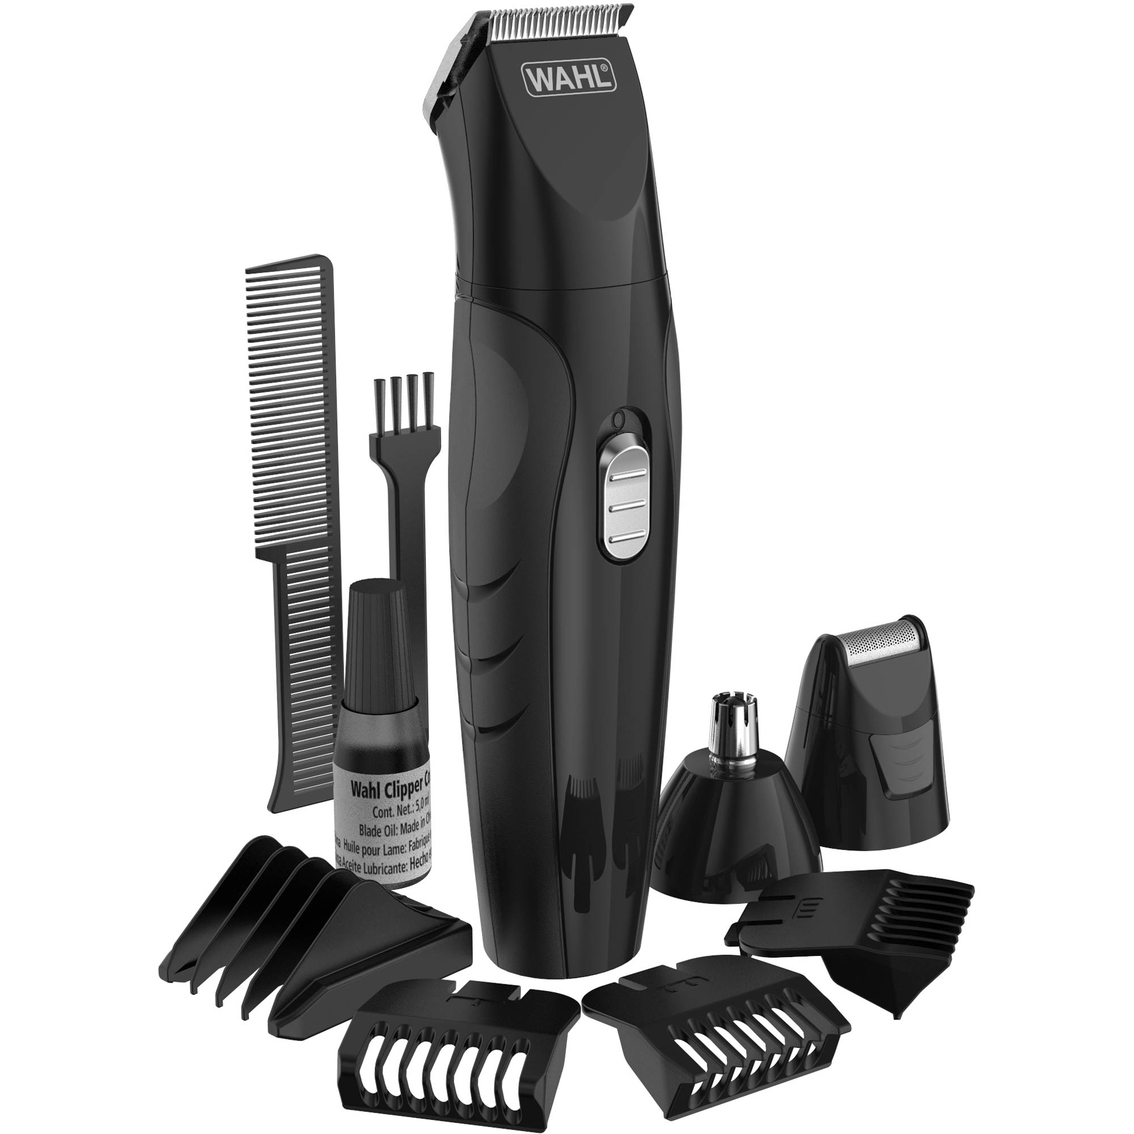 Wahl All in One Rechargeable Trimmer for Beard, Nose, Ear and Face - Image 2 of 4